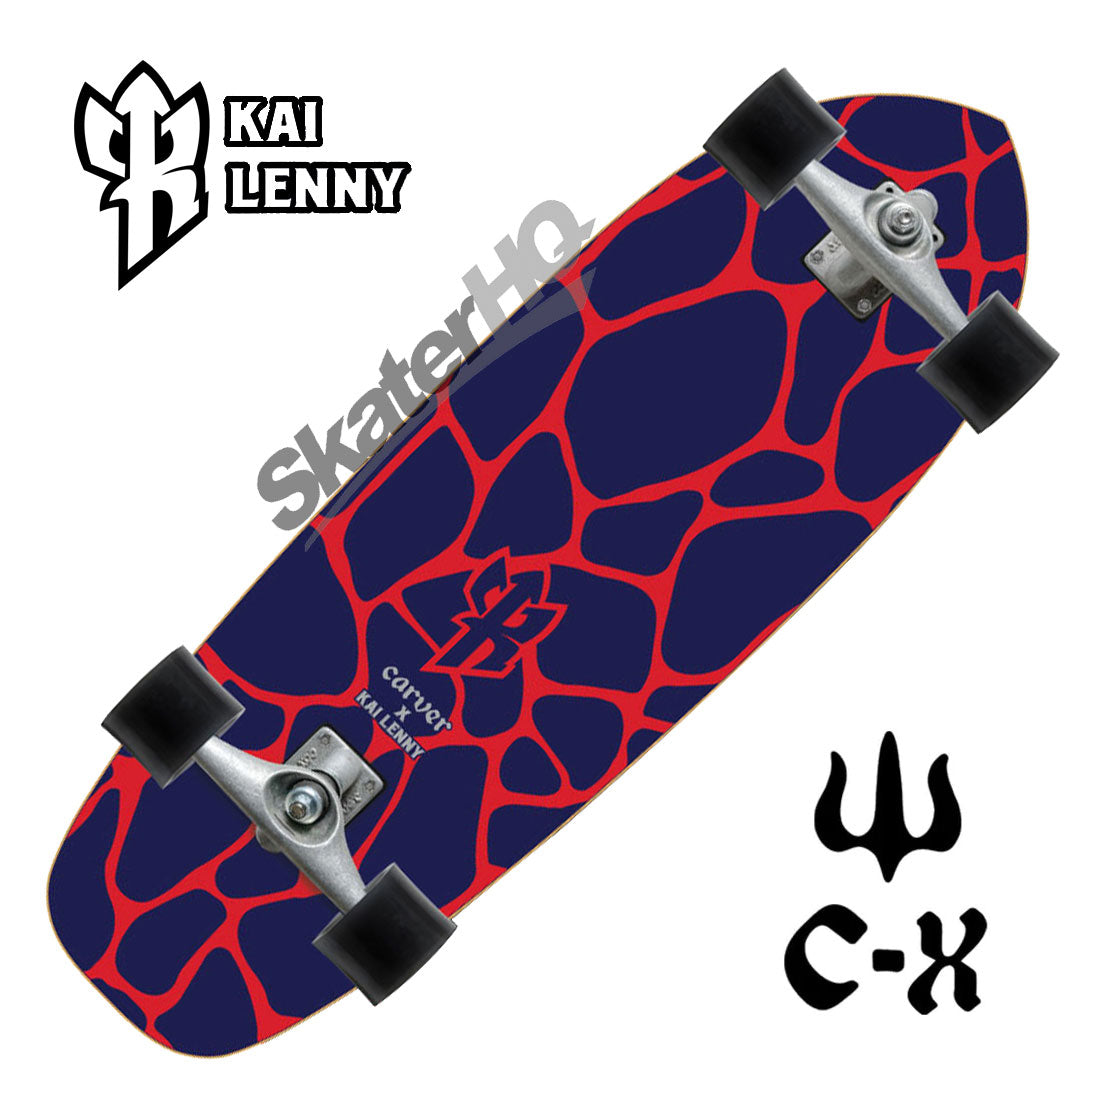 Carver x Kai Lenny Lava 31 CX Raw Complete Skateboard Compl Carving and Specialty